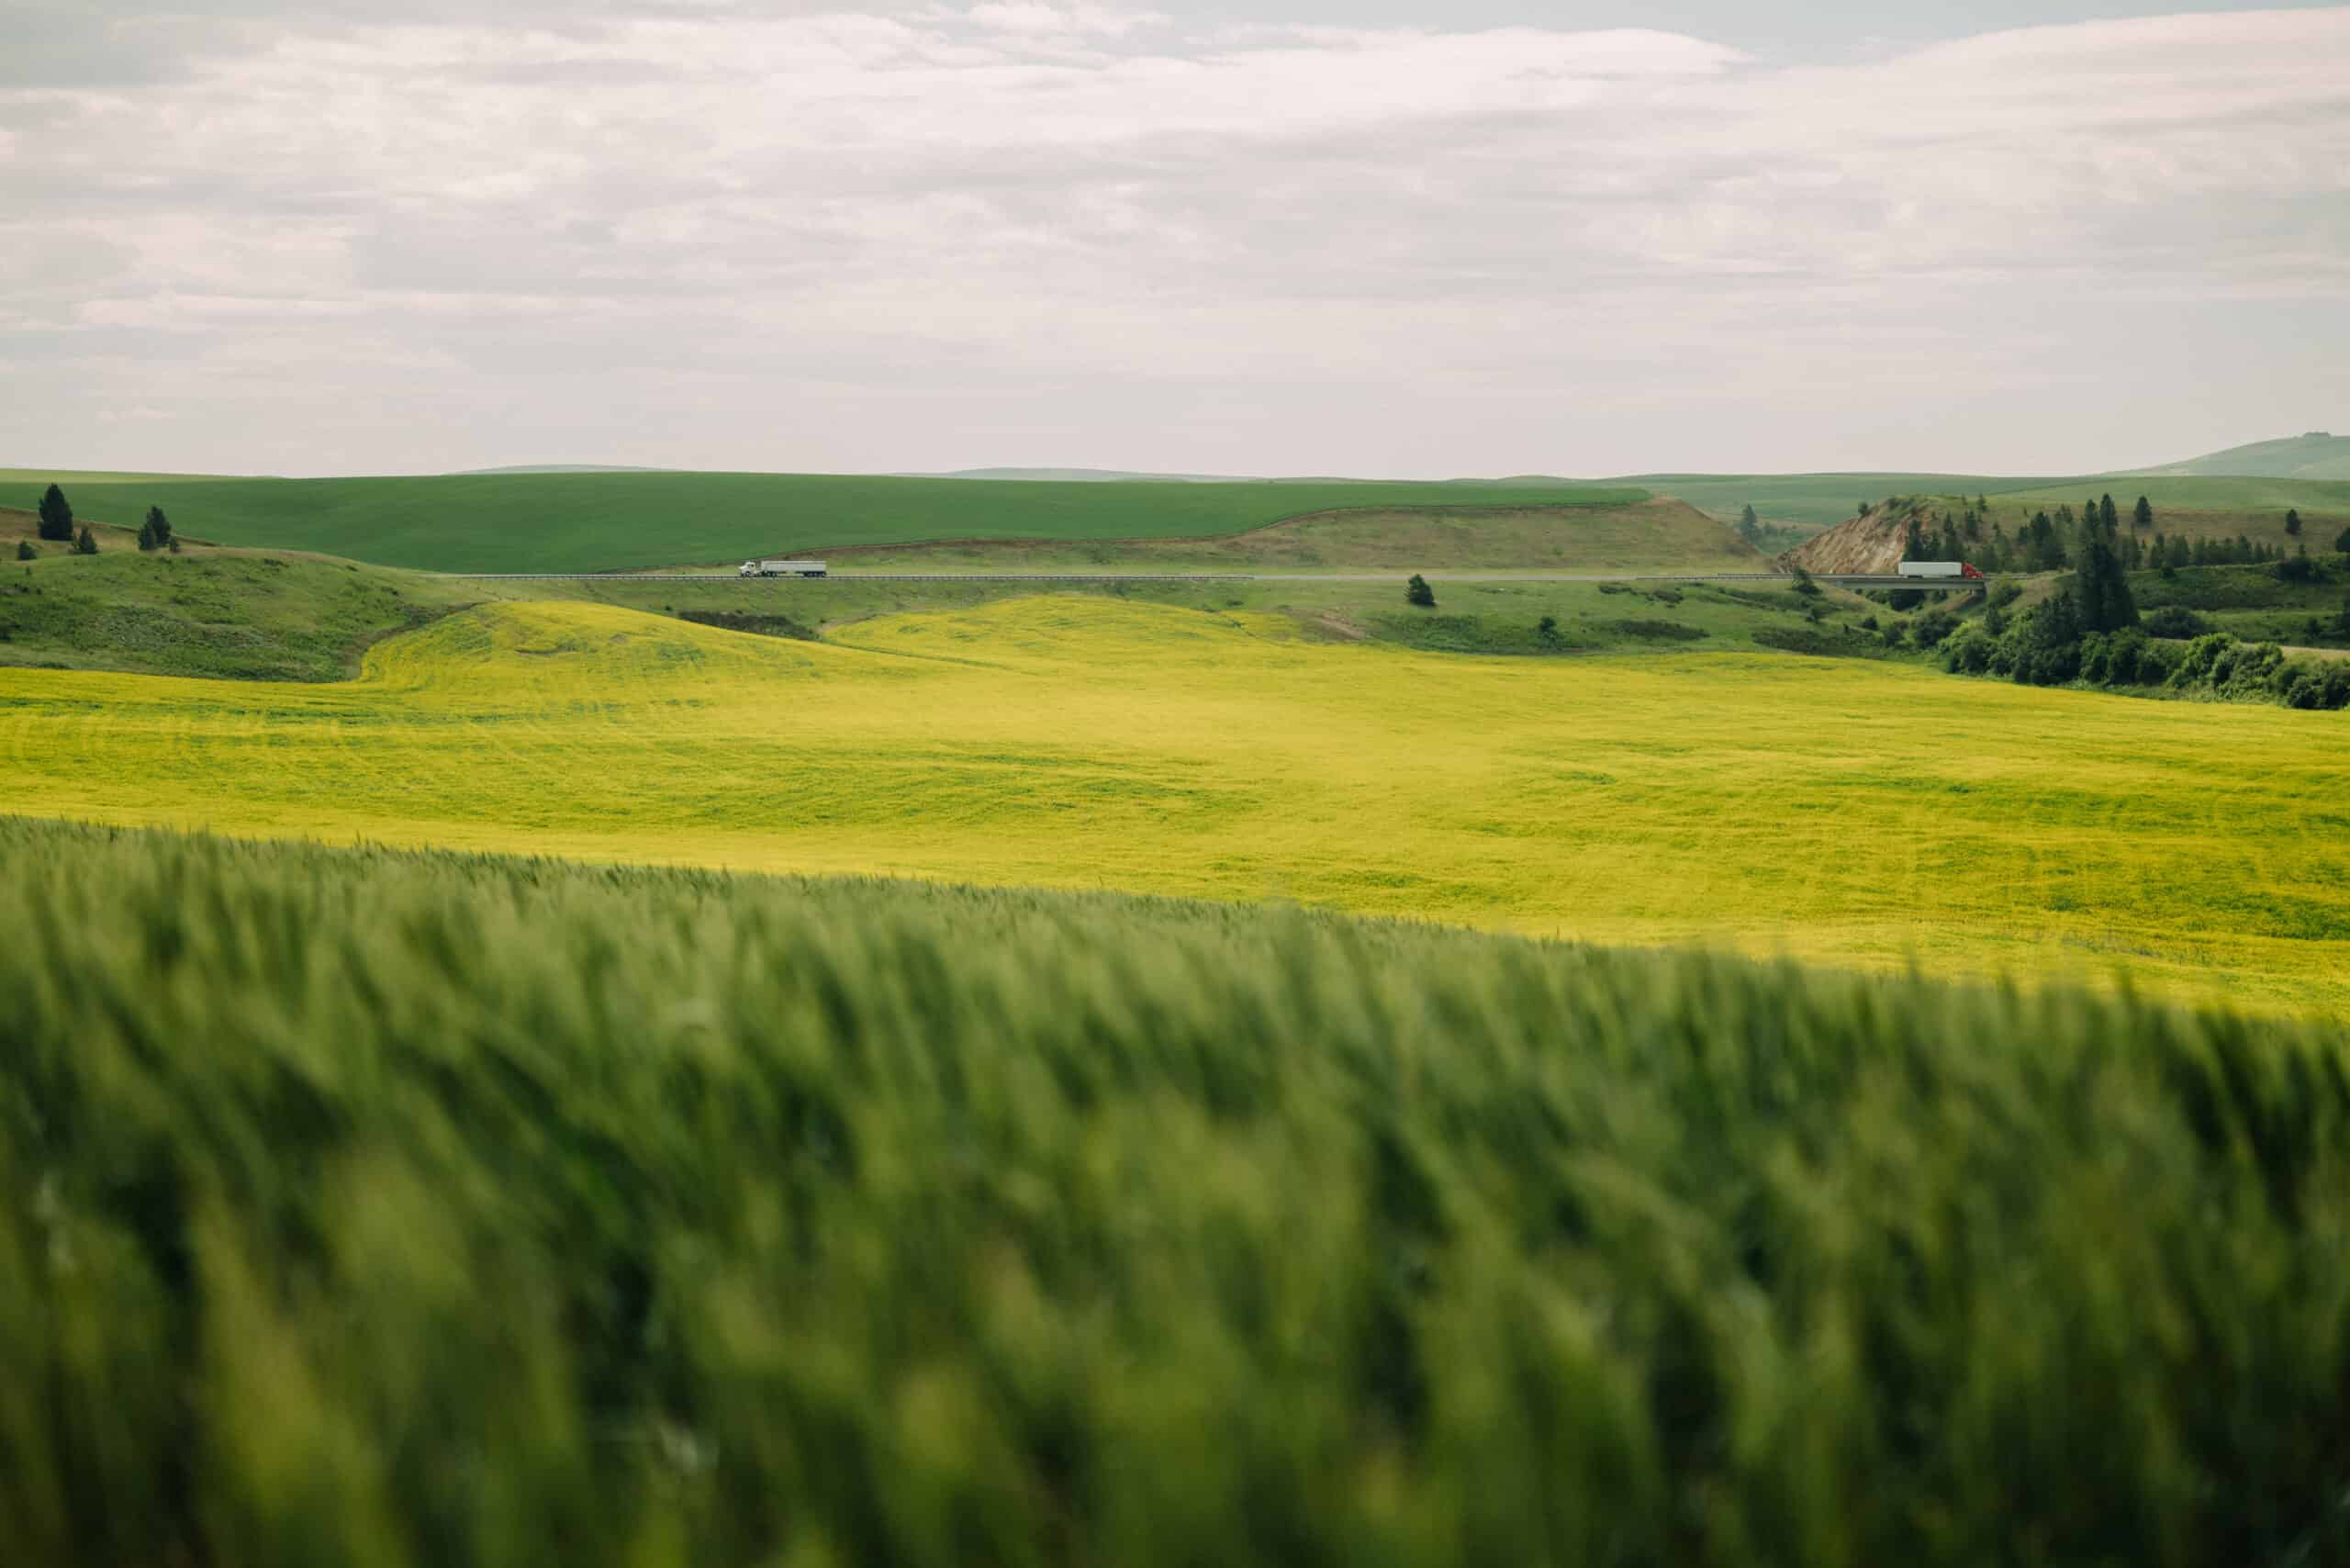 Stops along the Palouse Scenic Byway in Eastern Washington